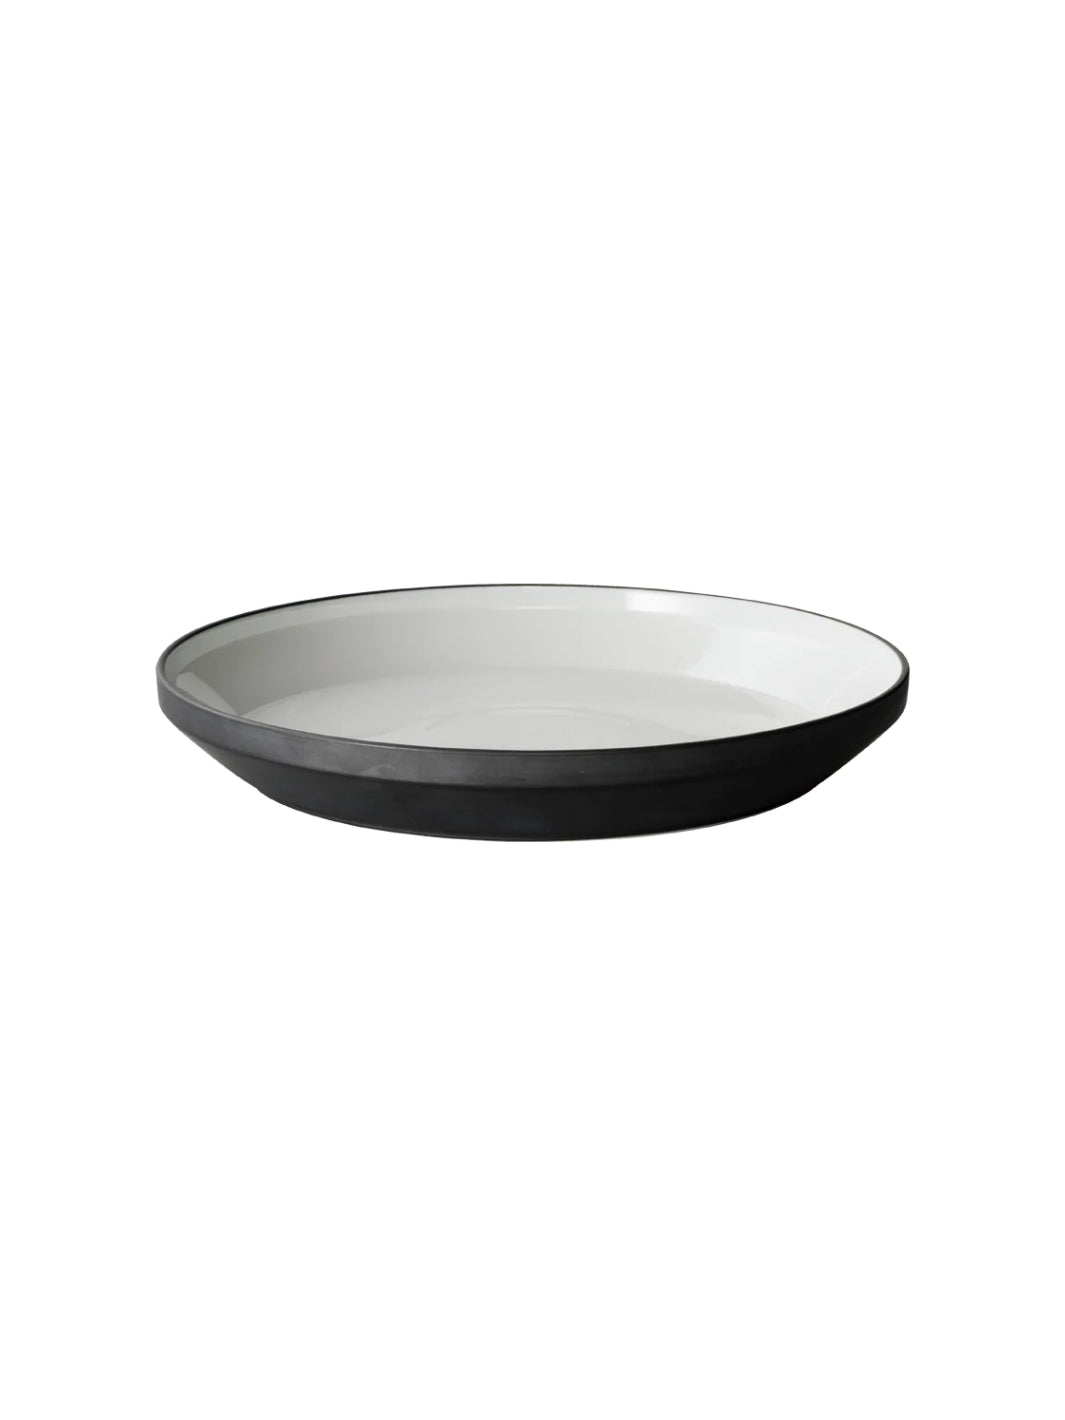 KINTO RIM Plate (240mm/9.5in) (3-Pack)